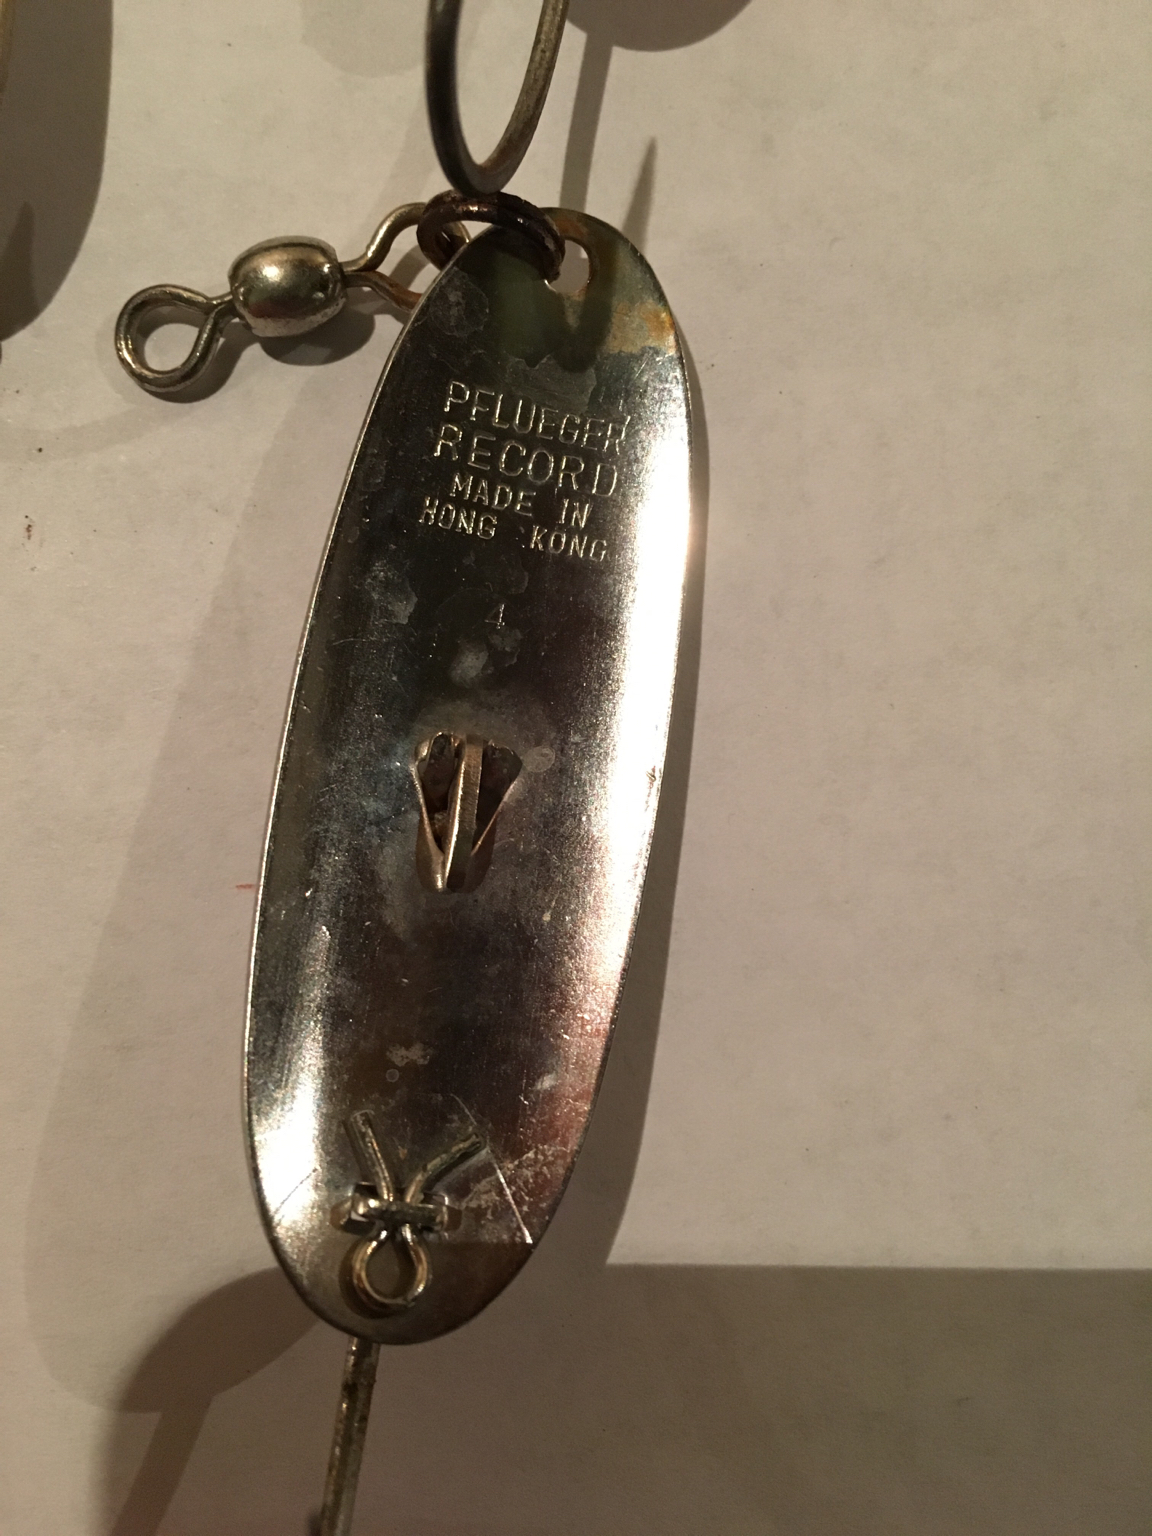 Pflueger and blade runner spoons- pulling copper 5 - $75